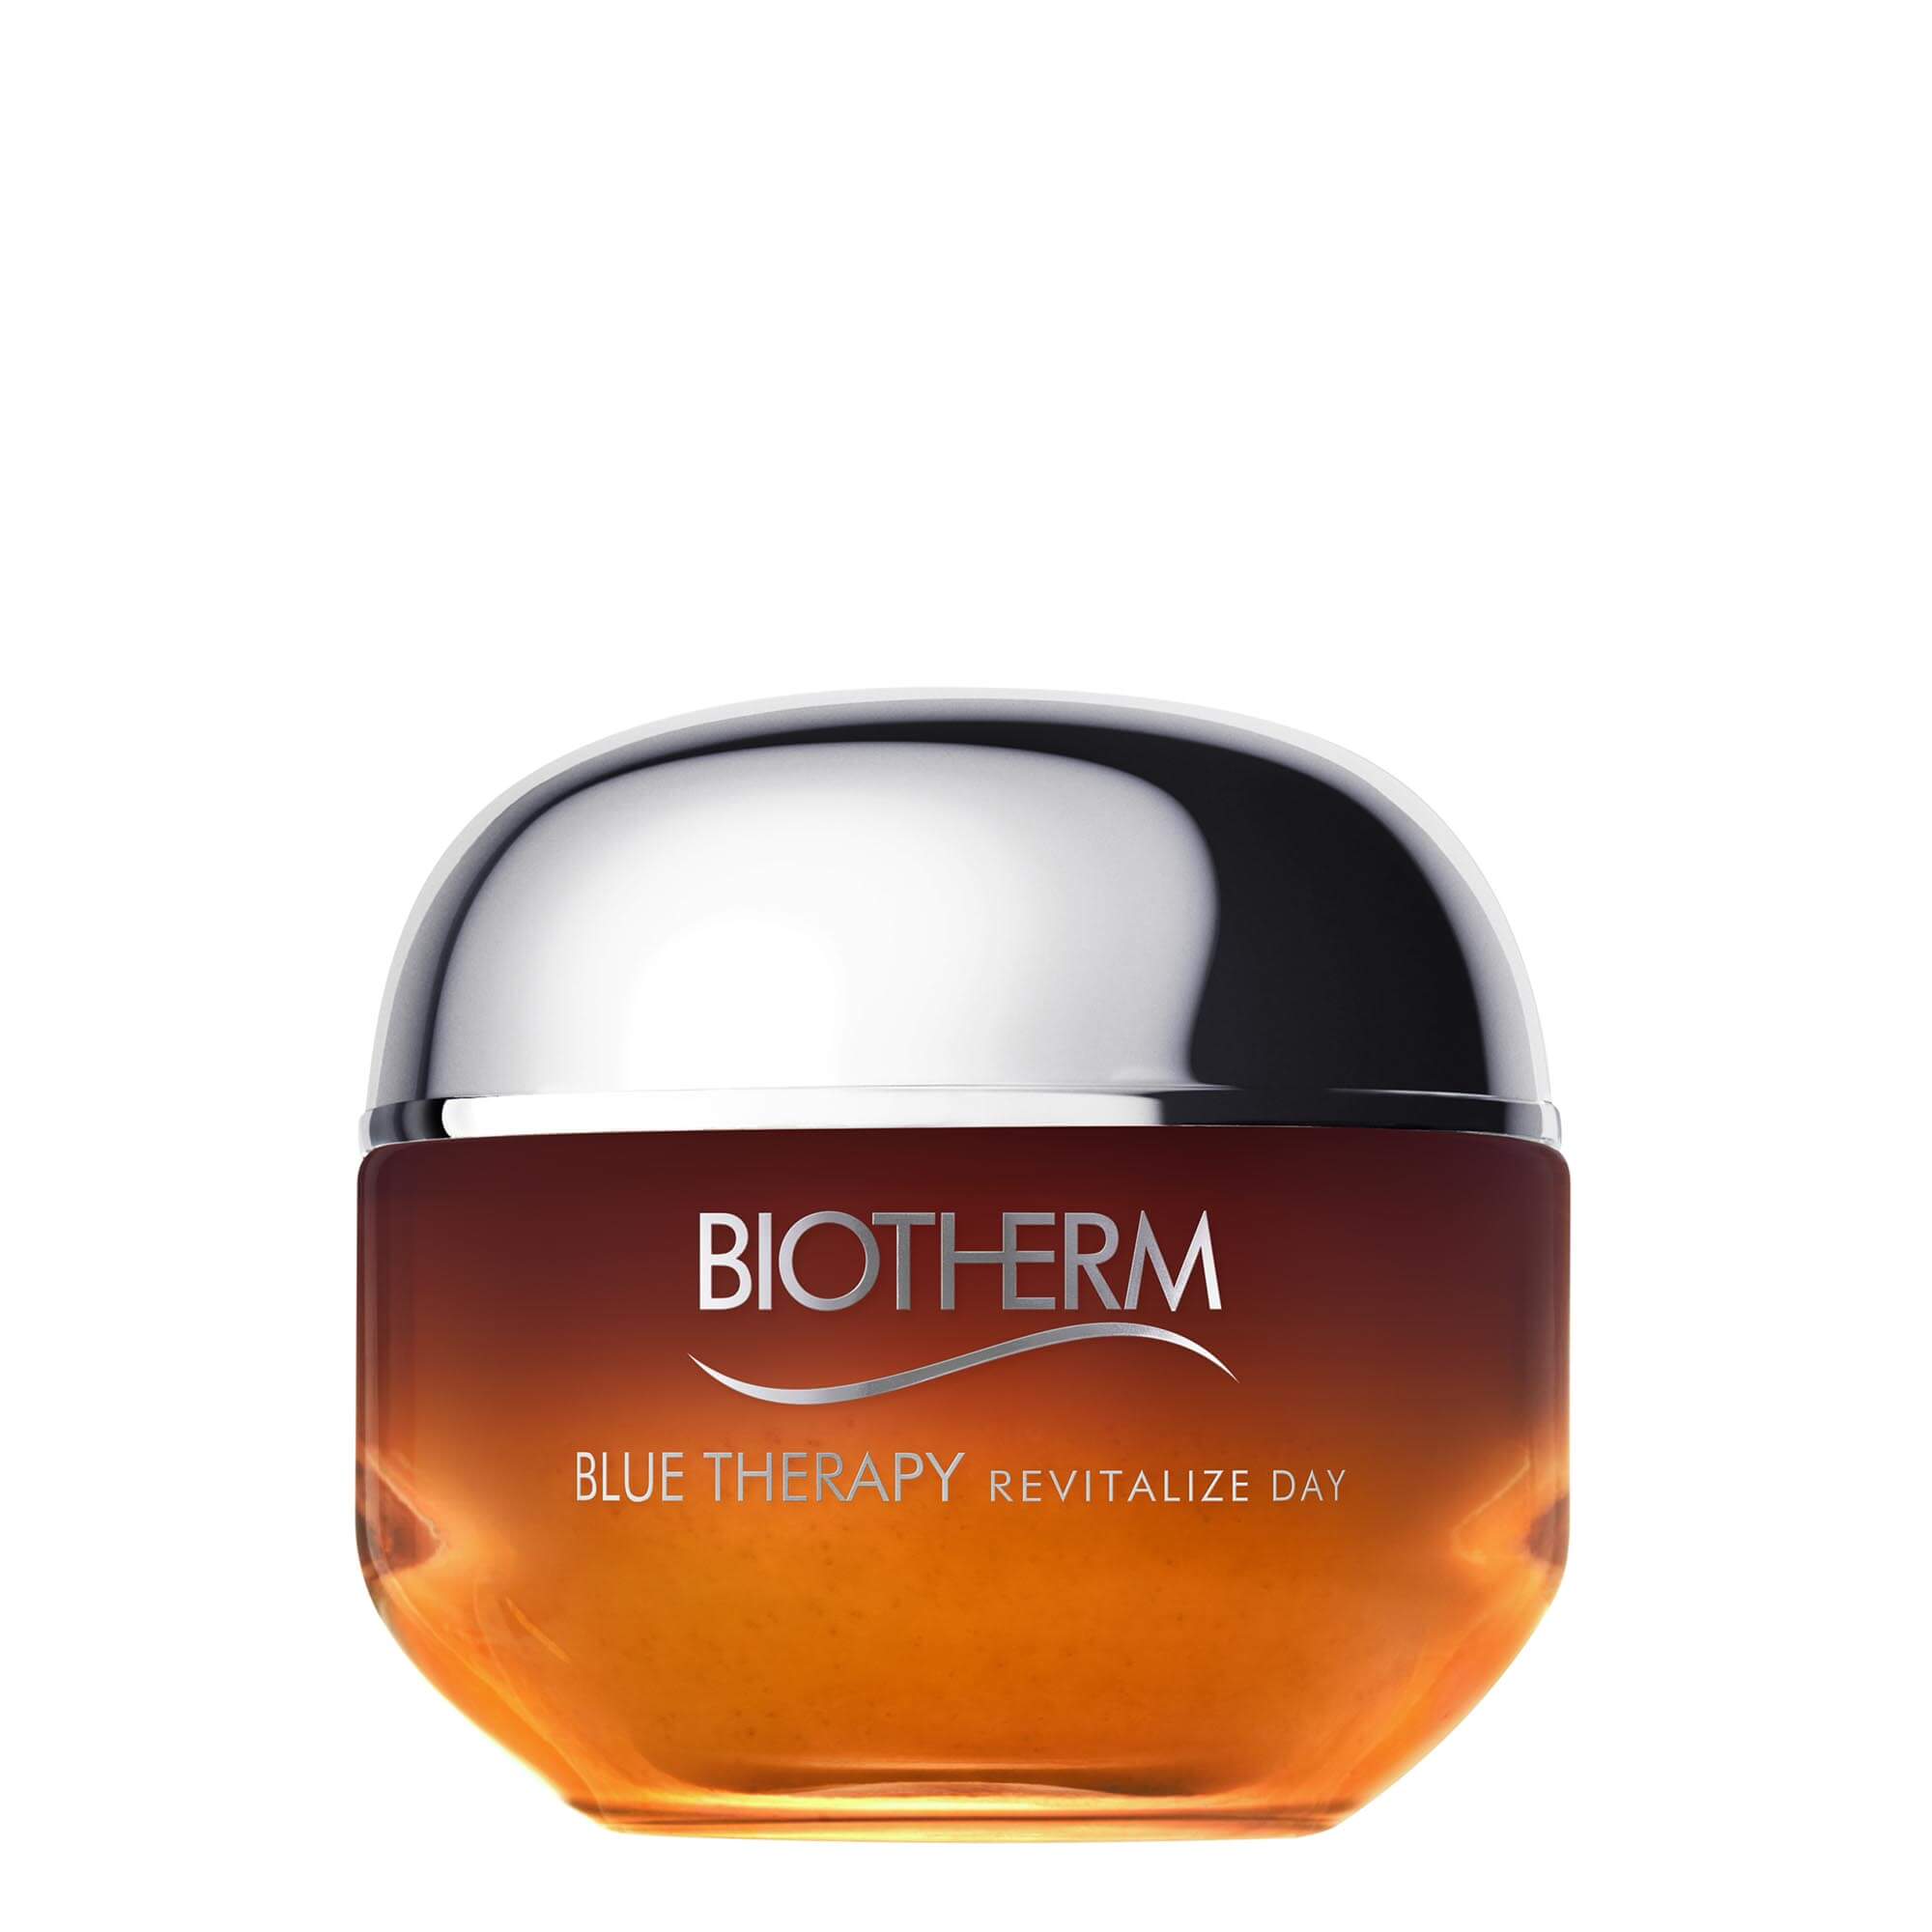 BIOTHERM - BLUE THERAPY REVITALIZE MOISTURIZING DAY CREAM